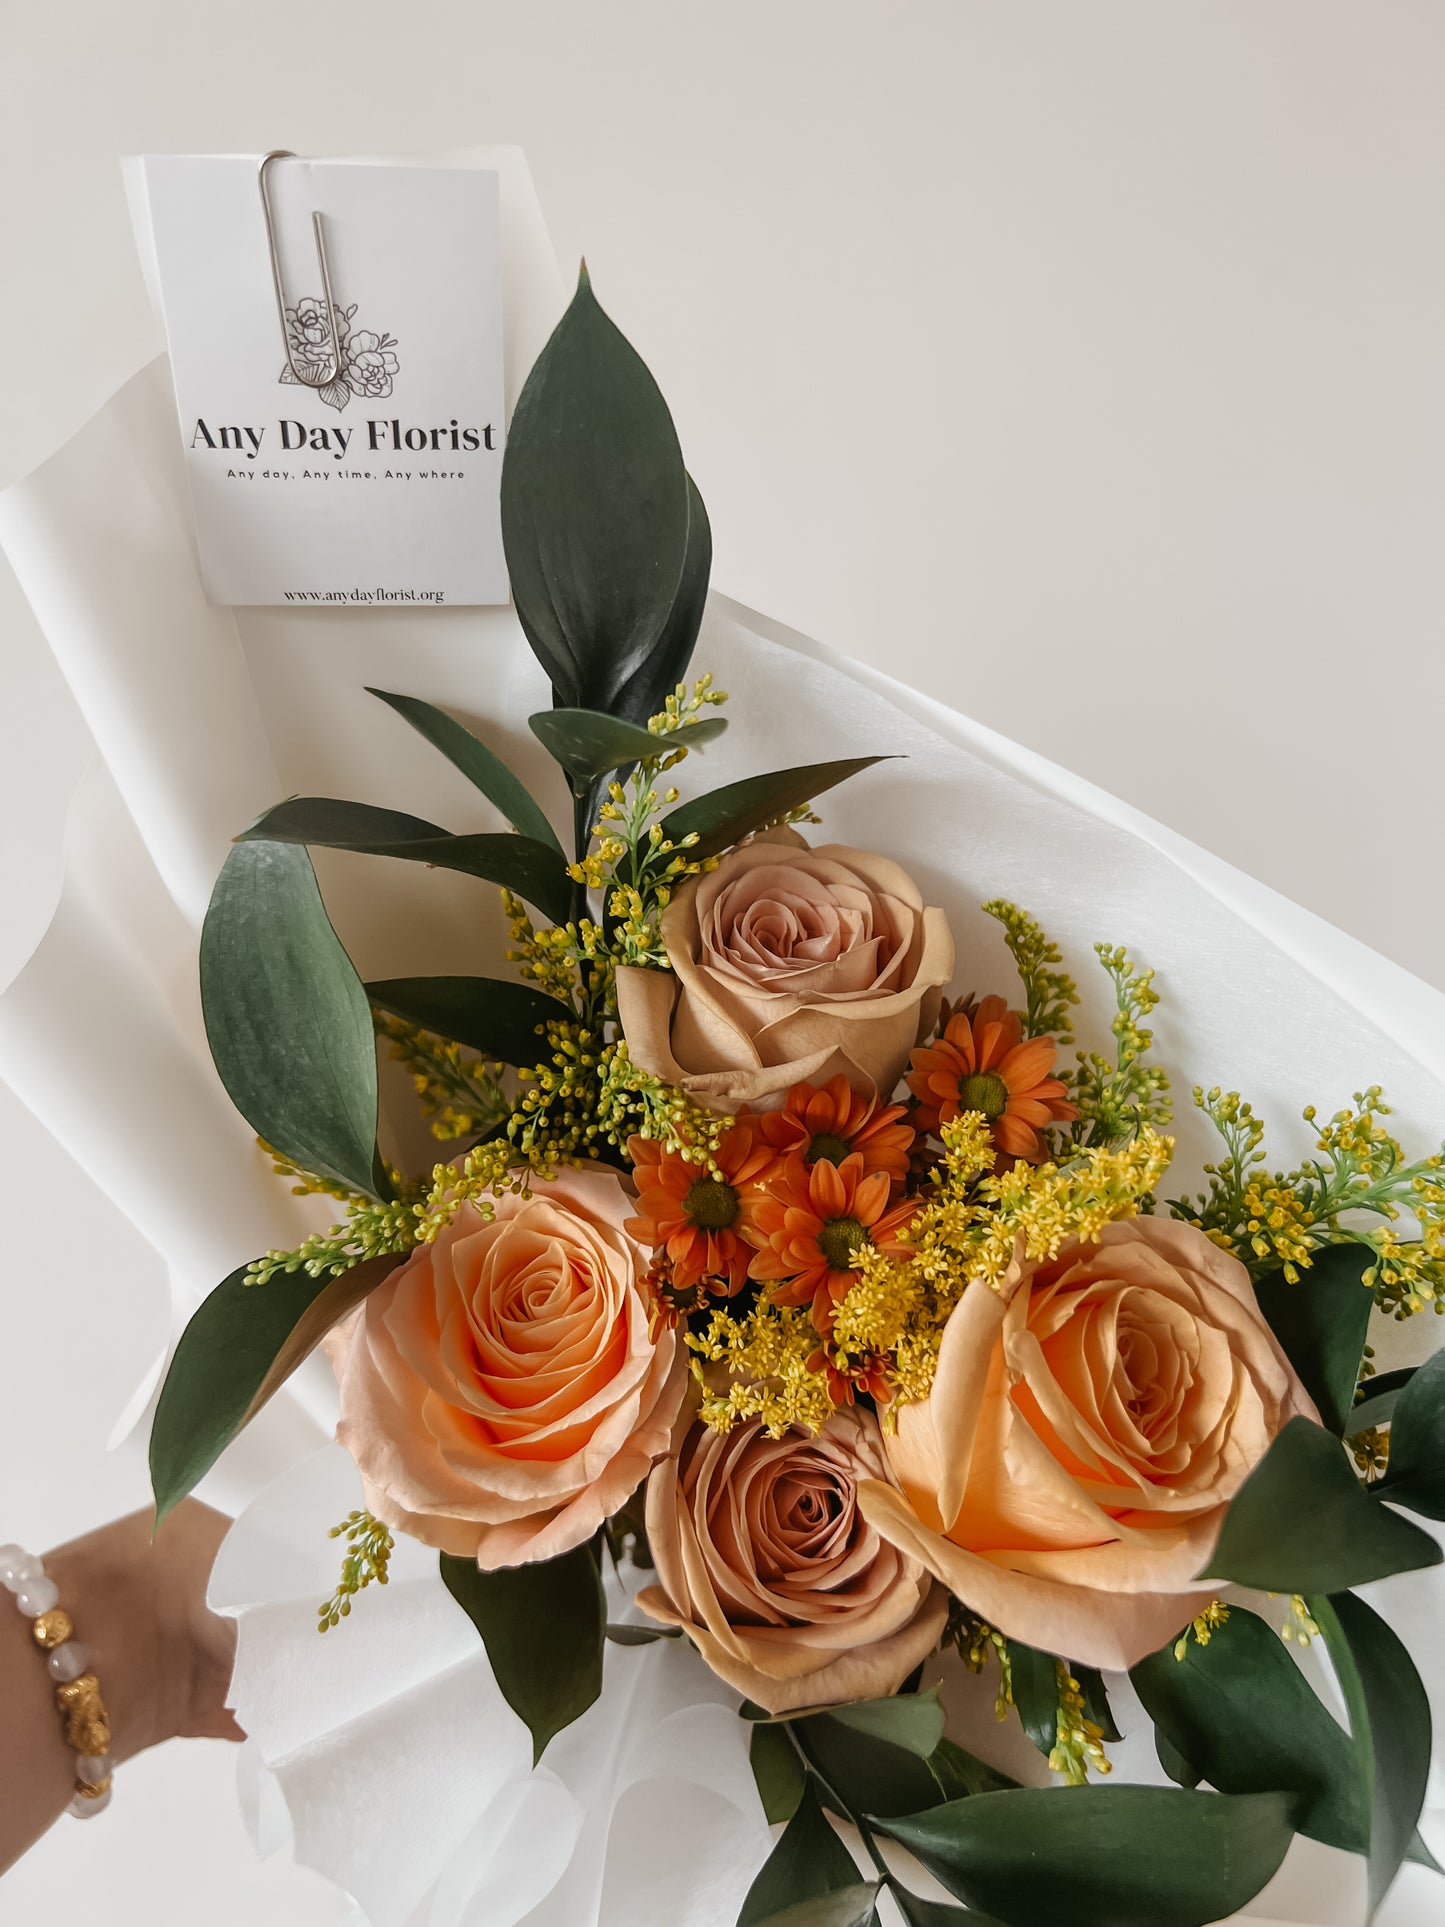 Any Day FloristProduct Description
The perfect way to say thank you to a friend or loved one, this shimmering and colorful arrangement of cappuccino roses is an elegant gift that wCappuccino Shimmer Bouquet